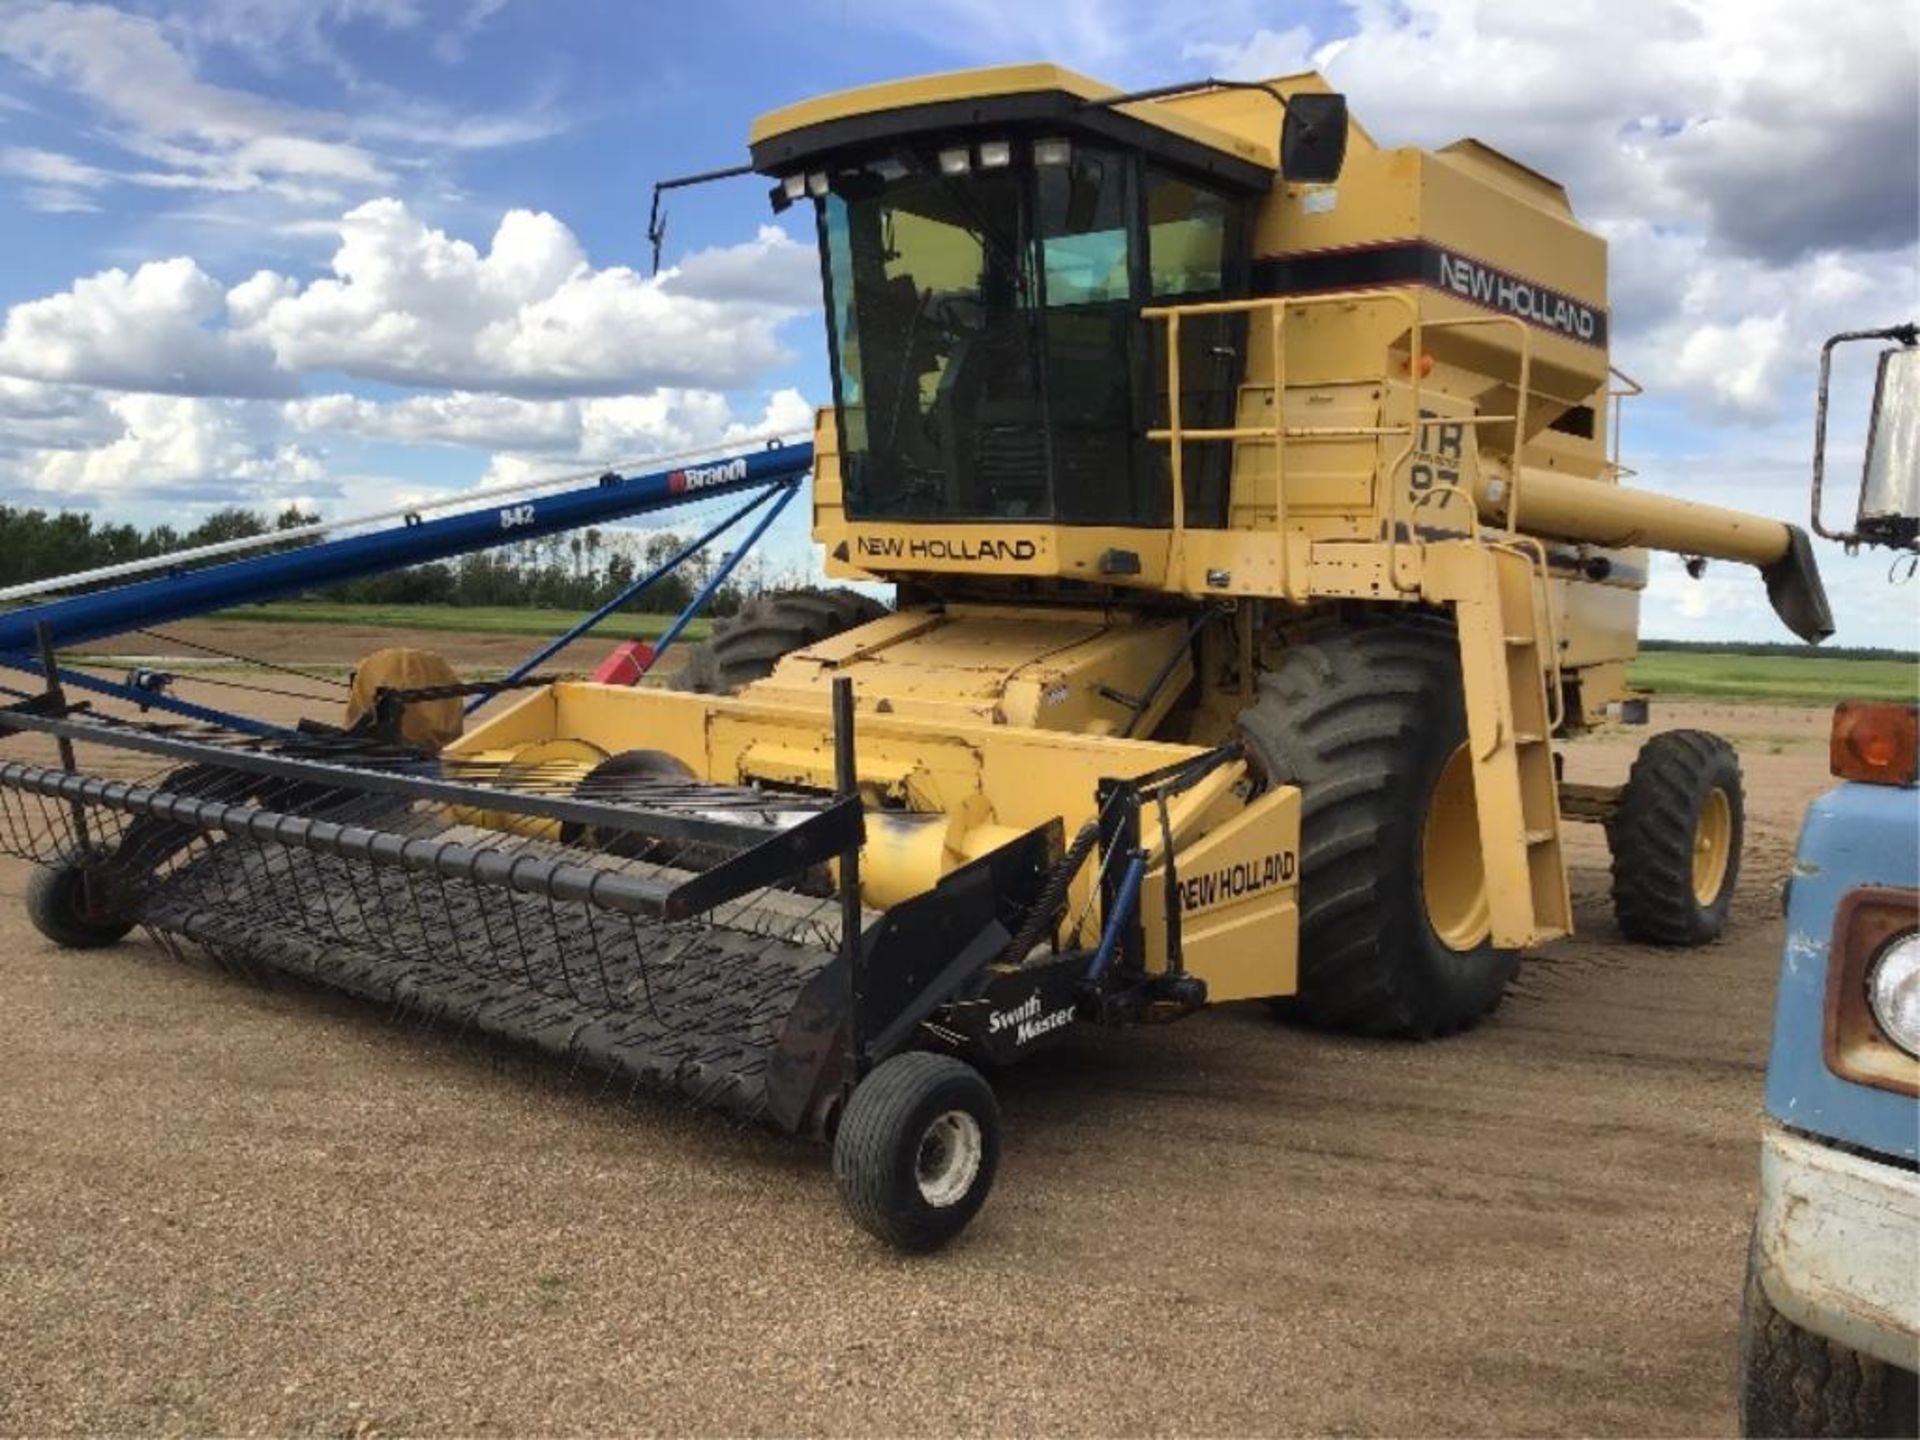 1994 New Holland TR97 Combine 30.5L-32fr, 14.9-24rr, 2147 Threshing hrs, 3005 Eng hrs, A/C Cab, 13Ft